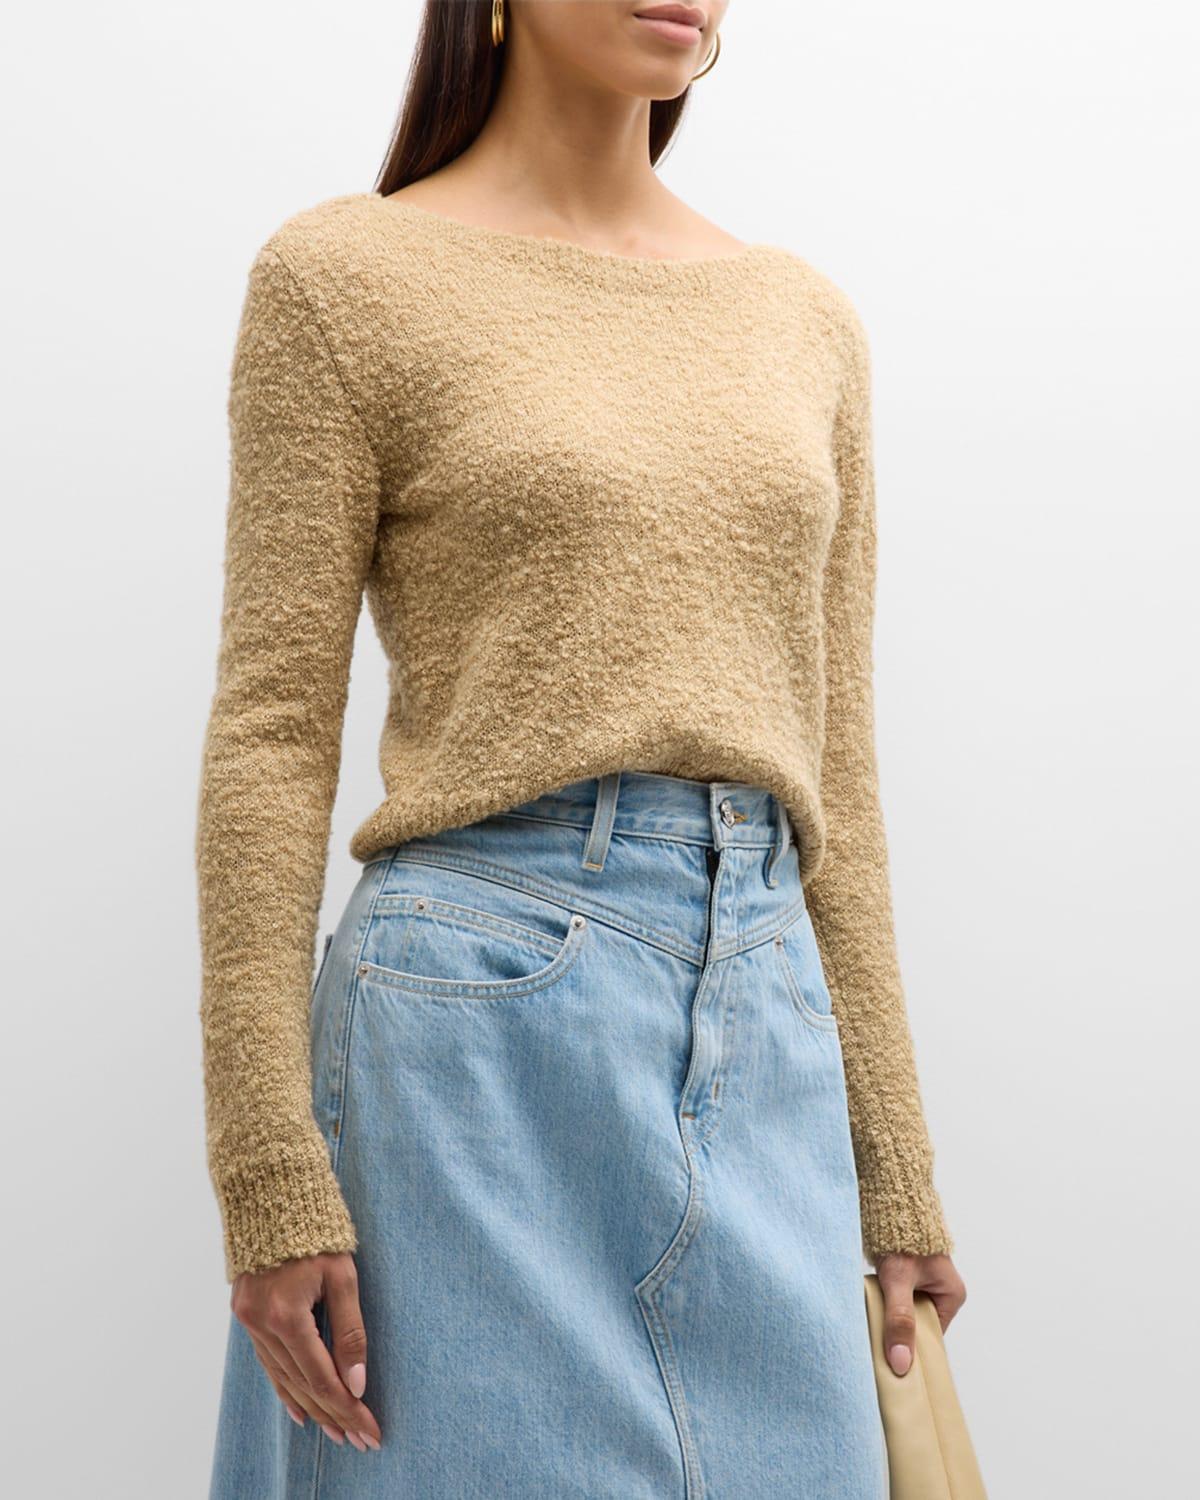 Womens Boucl Sweater Product Image